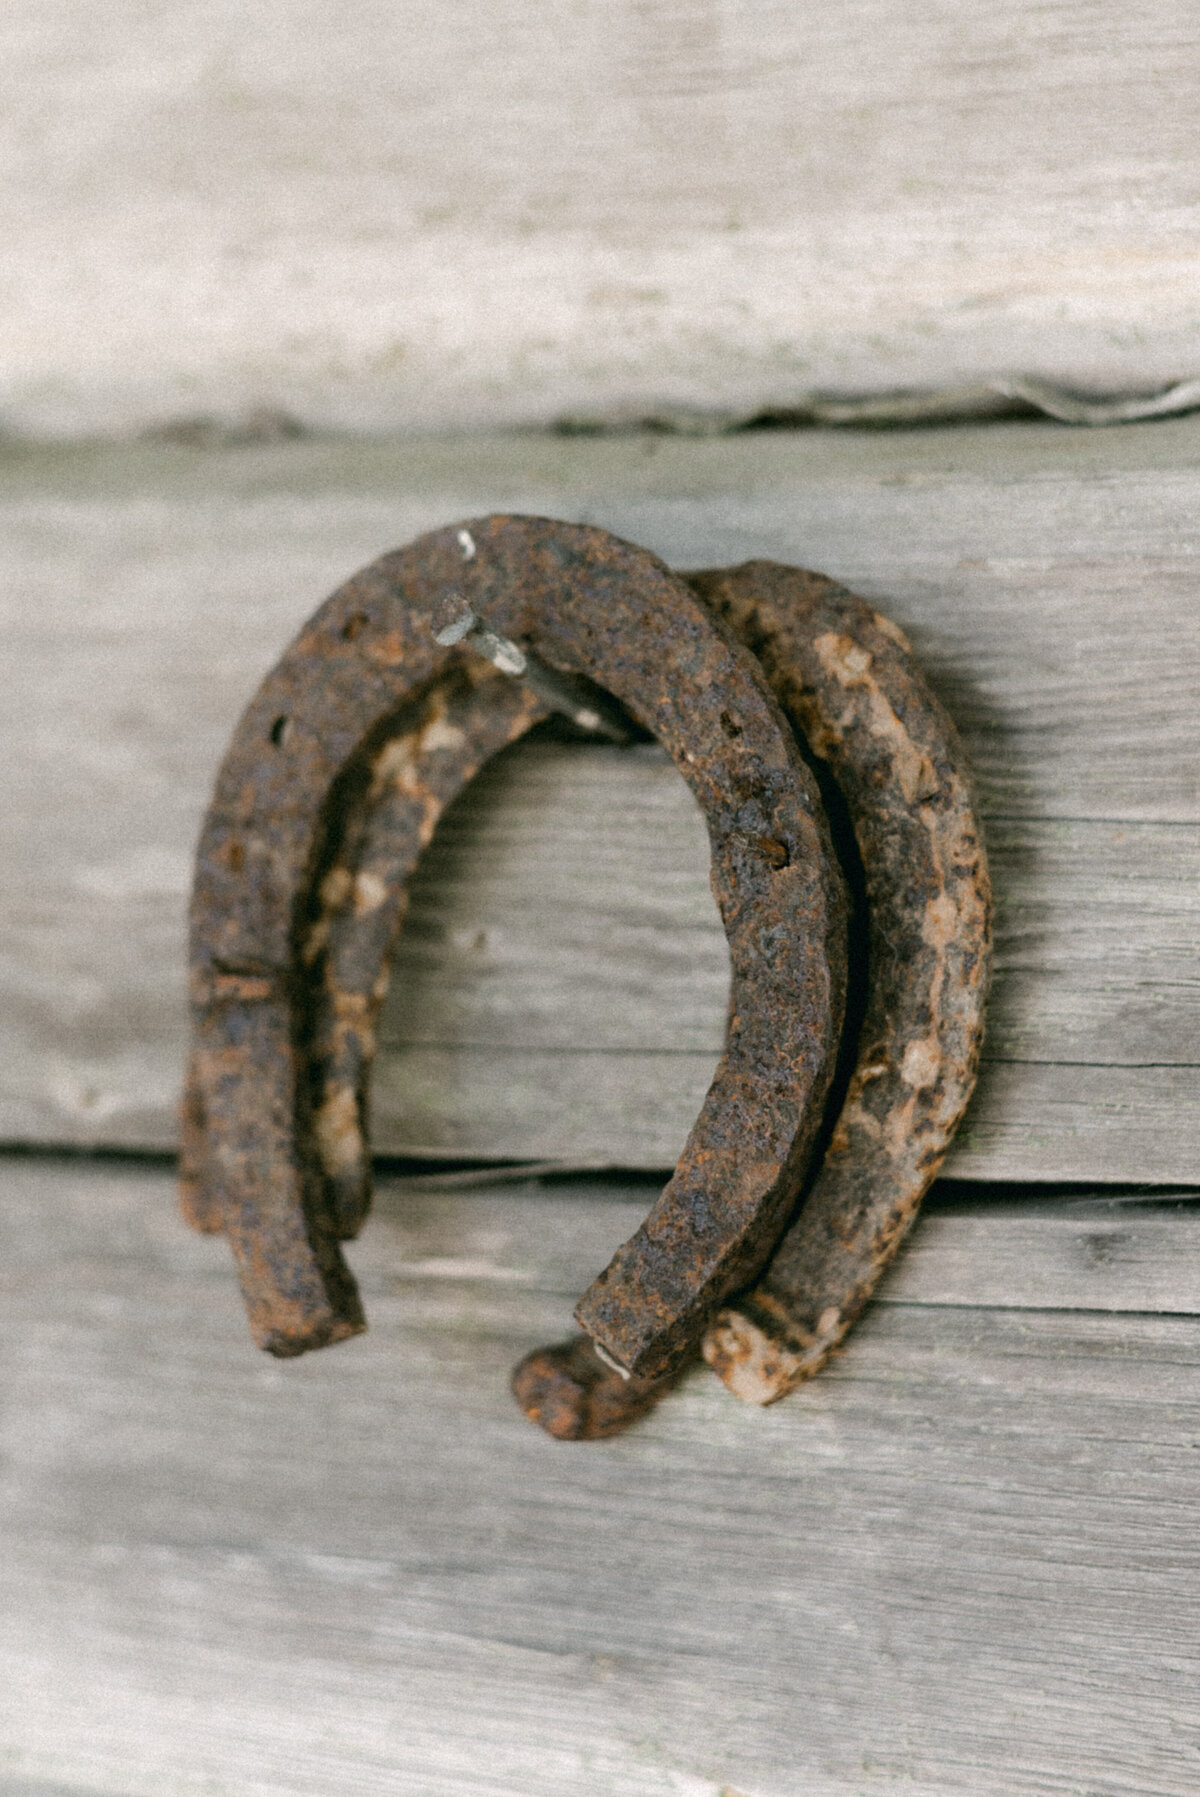 Horseshoes hanging on the wall. An image by wedding photographer Hannika Gabrielsson.